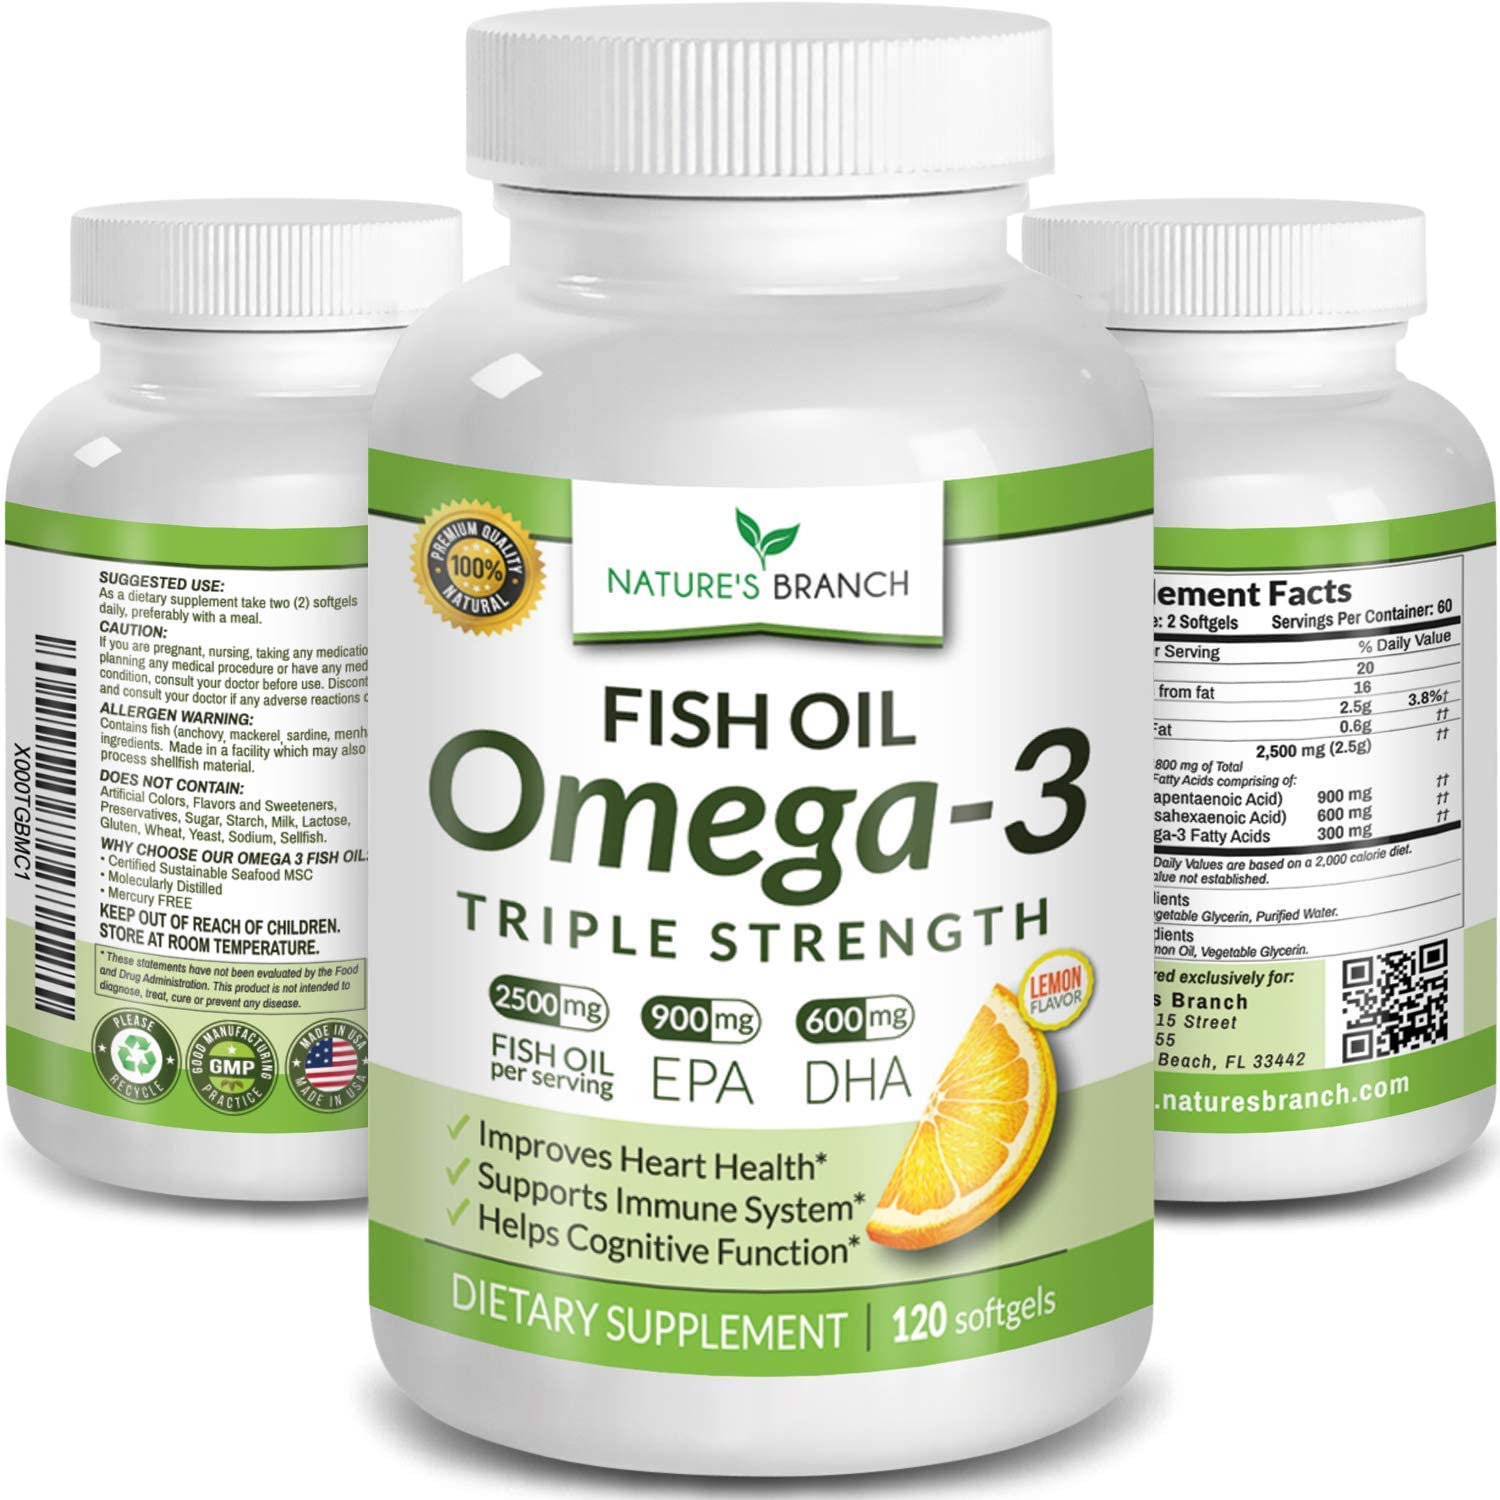 Ranking the best fish oil supplements of 2021